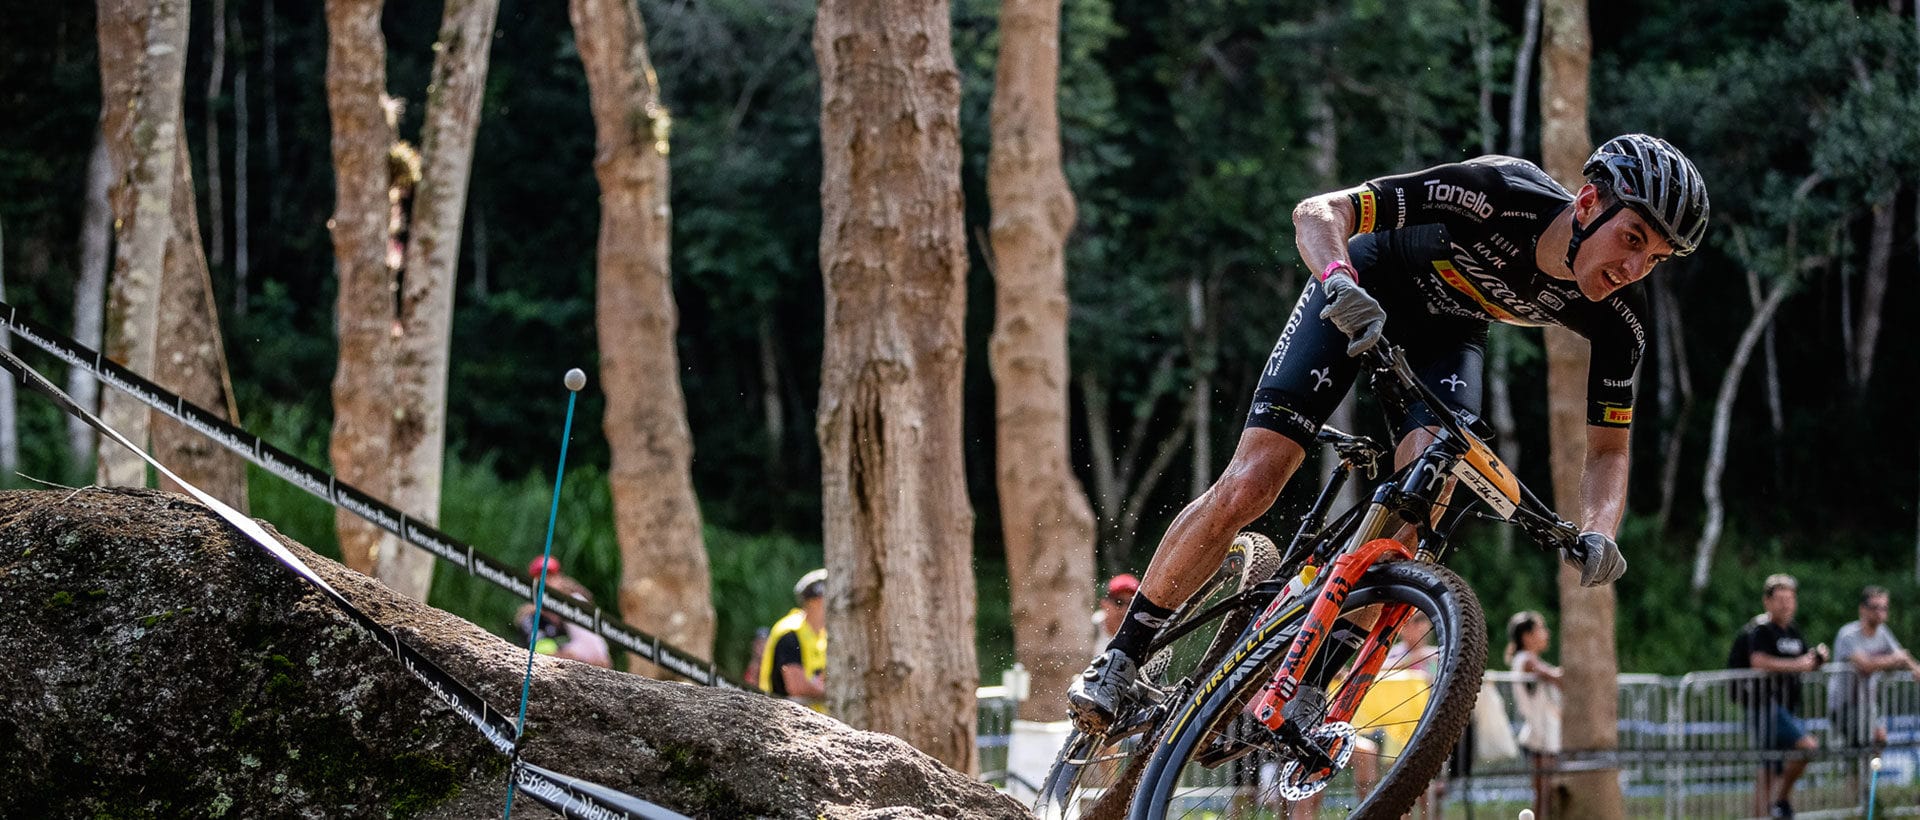 2021’s U23 MTB World Cup overall silver medallist, Simone Avondetto checks in with Wilier after the first World Cup of 2022.